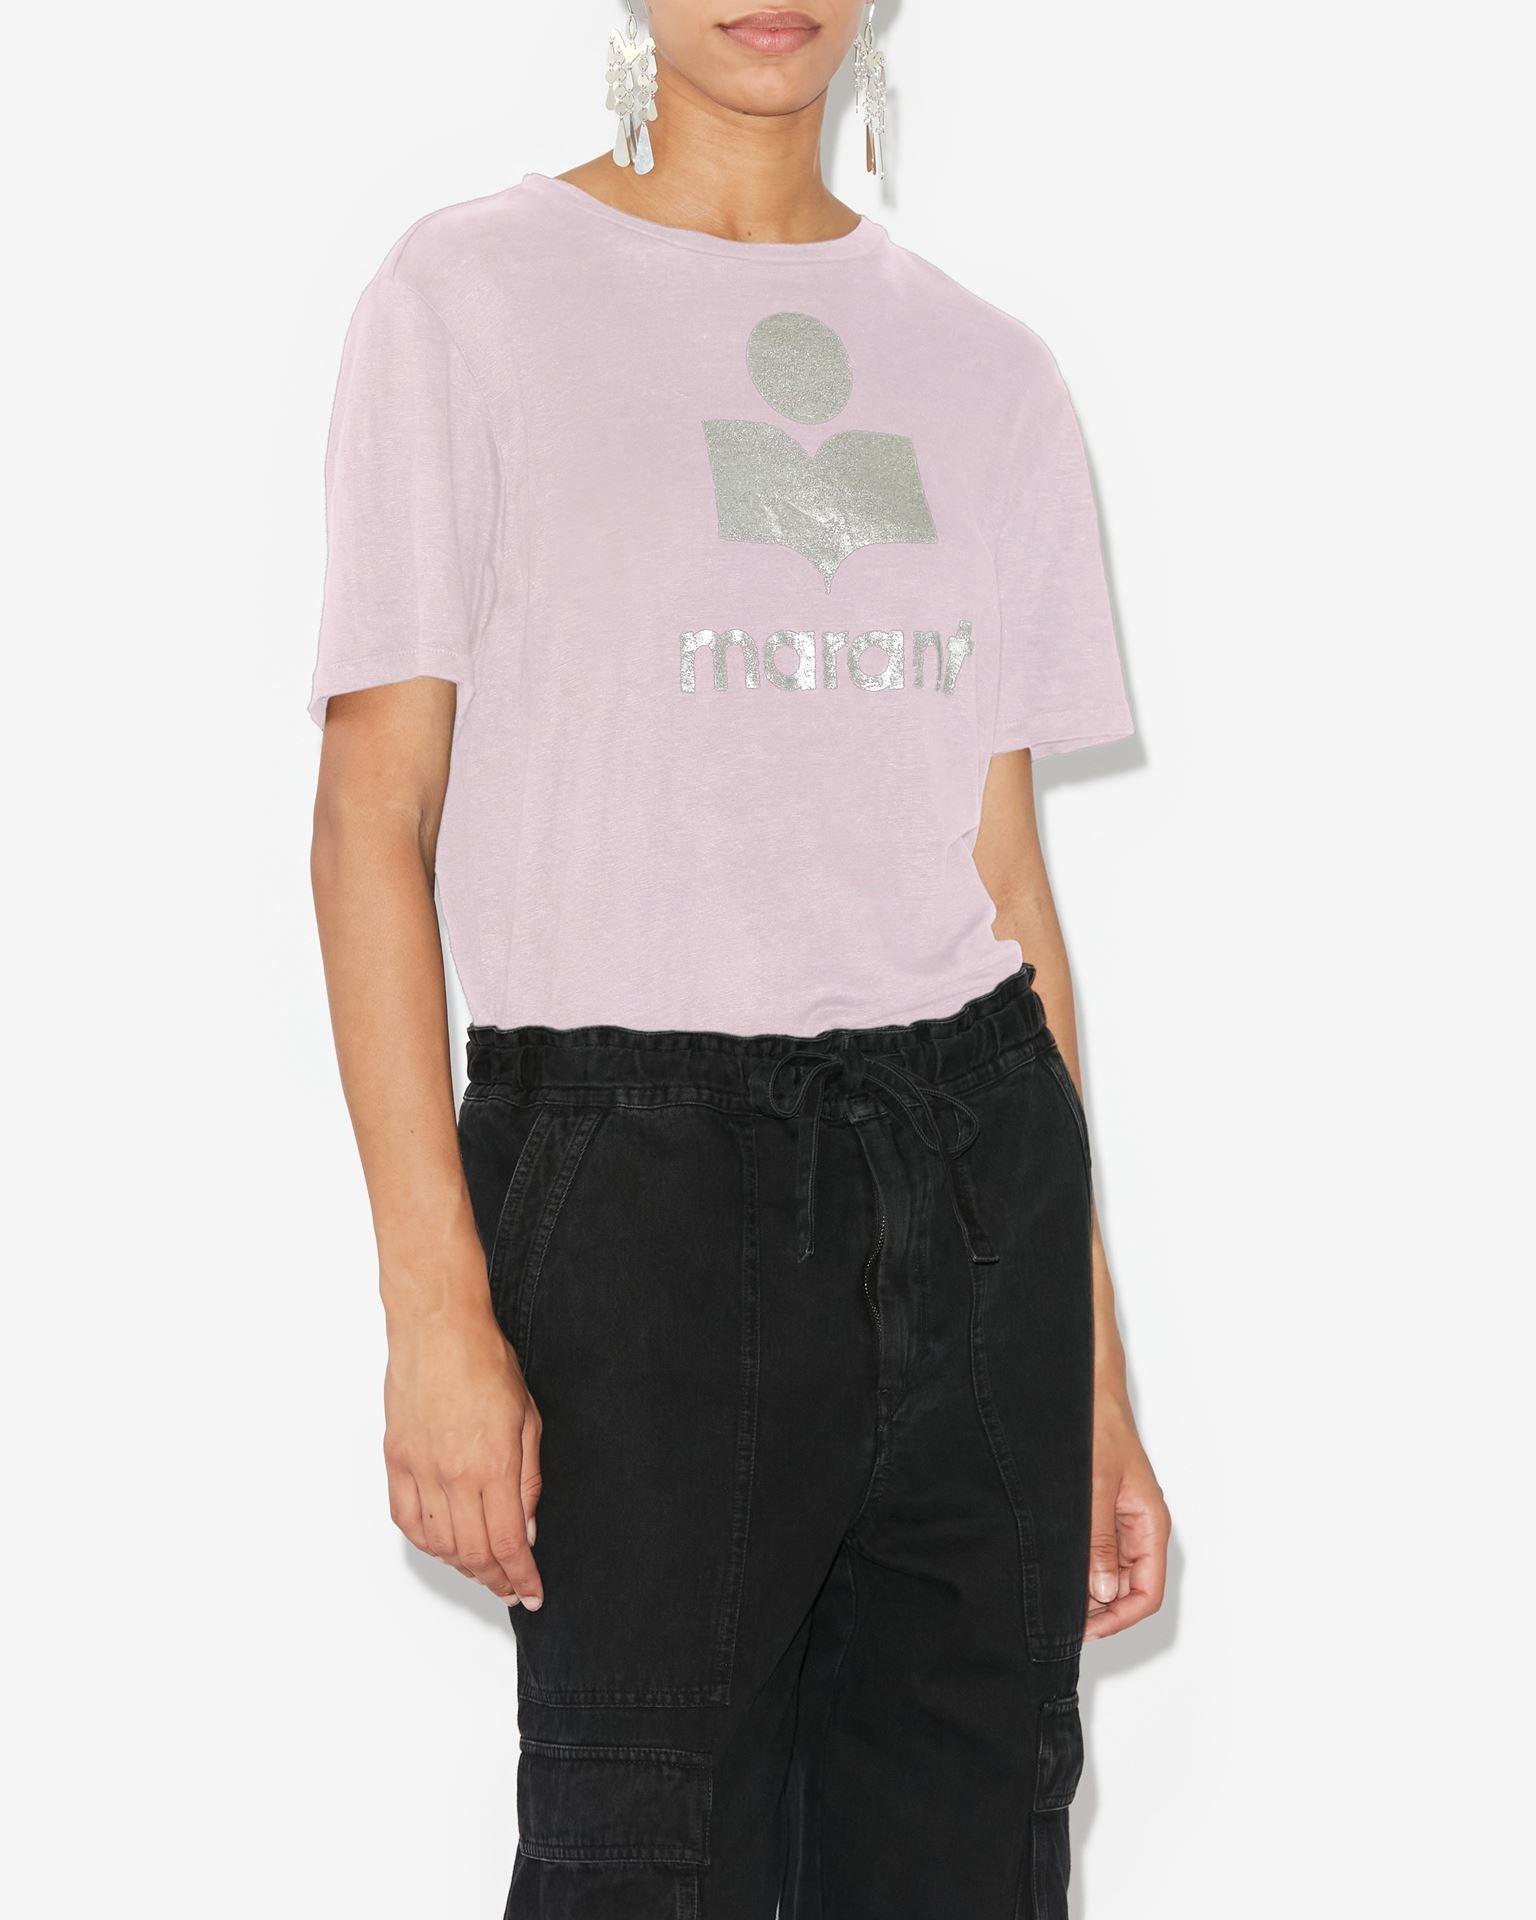 Zewel Tee Shirt in Pearl Rose and Silver